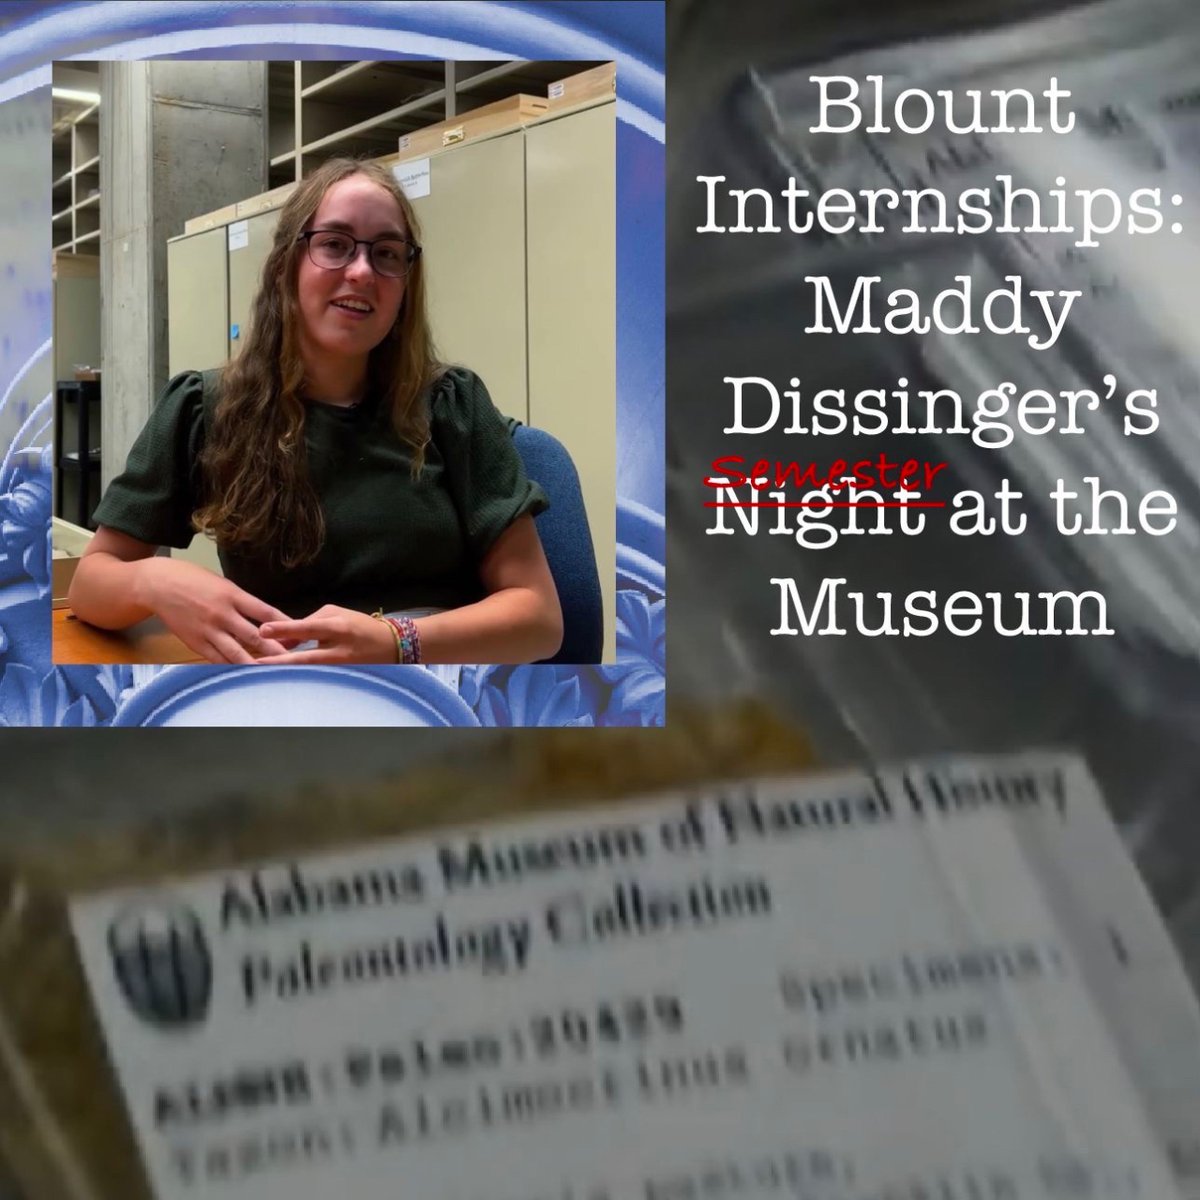 This #WhatsUpWednesday, check out the amazing internship Blountee Maddy Dissinger recently completed: She spent Spring 2023 learning to curate fossils in @uamuseums' paleontology collection, including helping develop and create the collections’ new labels! collections.museums.ua.edu/2023/08/29/the…